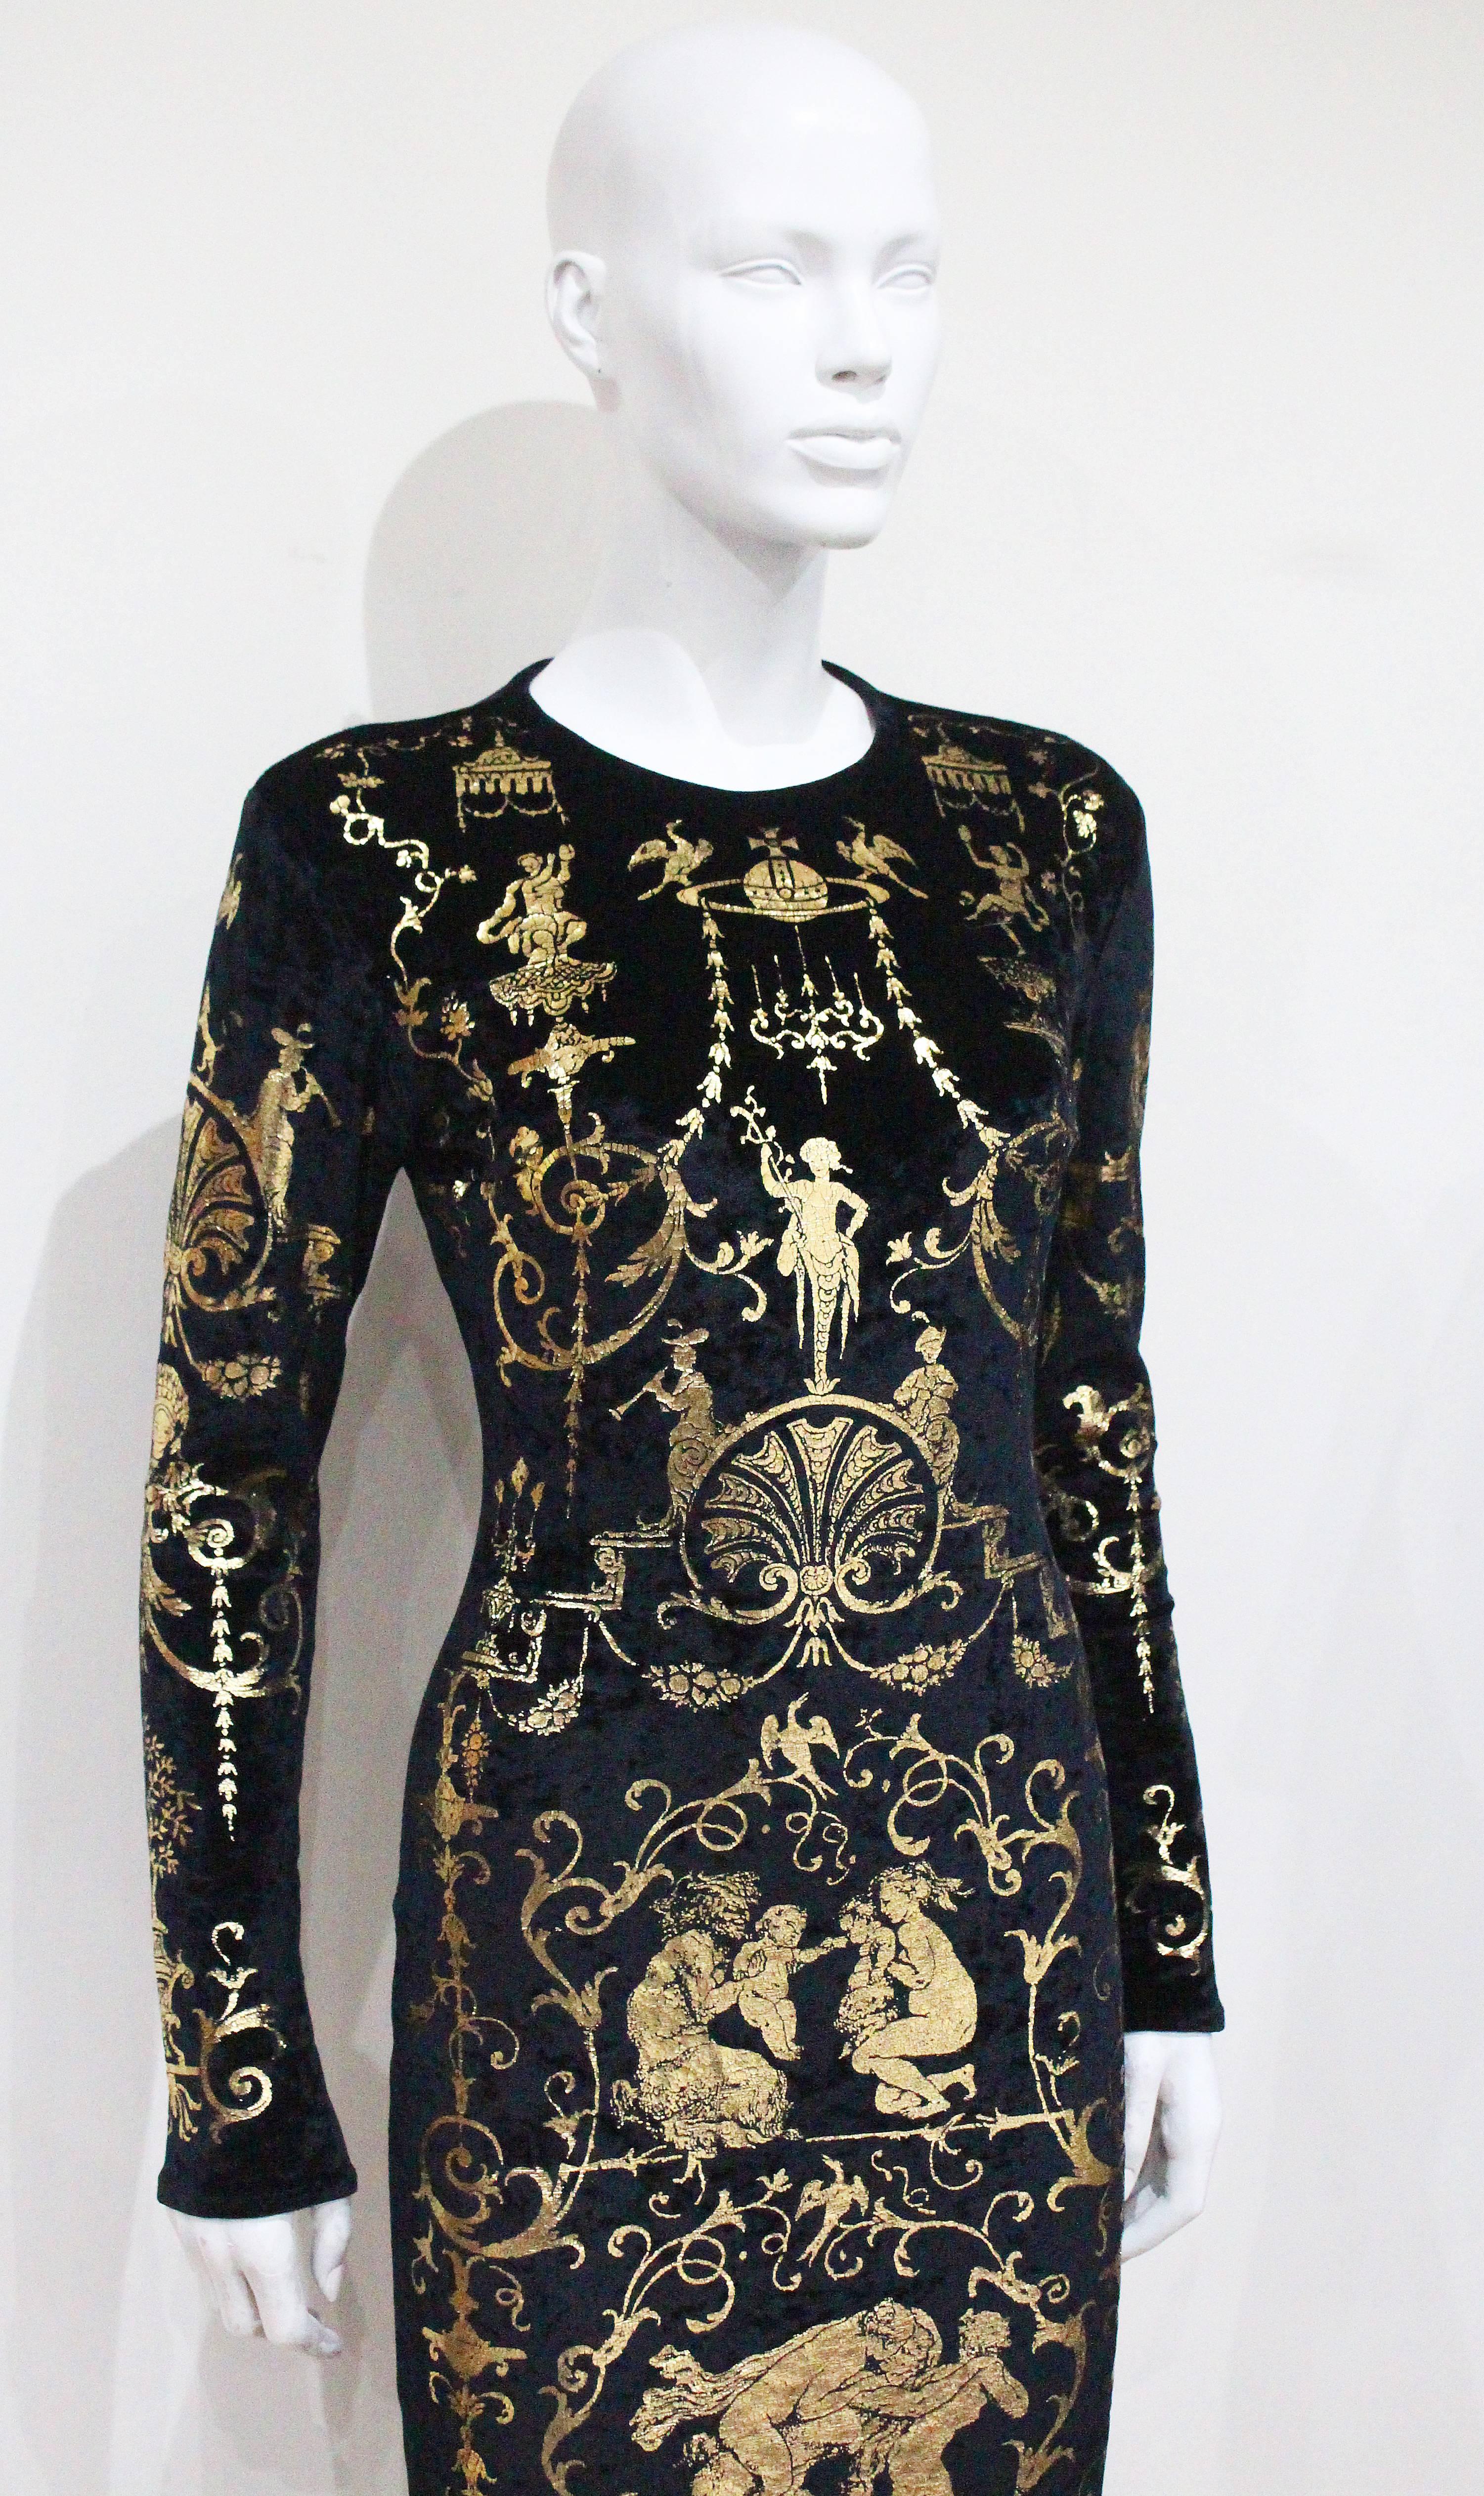 This dress comes from the famous A/W 1990 'Portrait' Collection. This full length body con dress is made of black velvet with gold leaf, this was inspired by the Rococo furniture decorated with the Boulle technique (the technique of inlaying brass